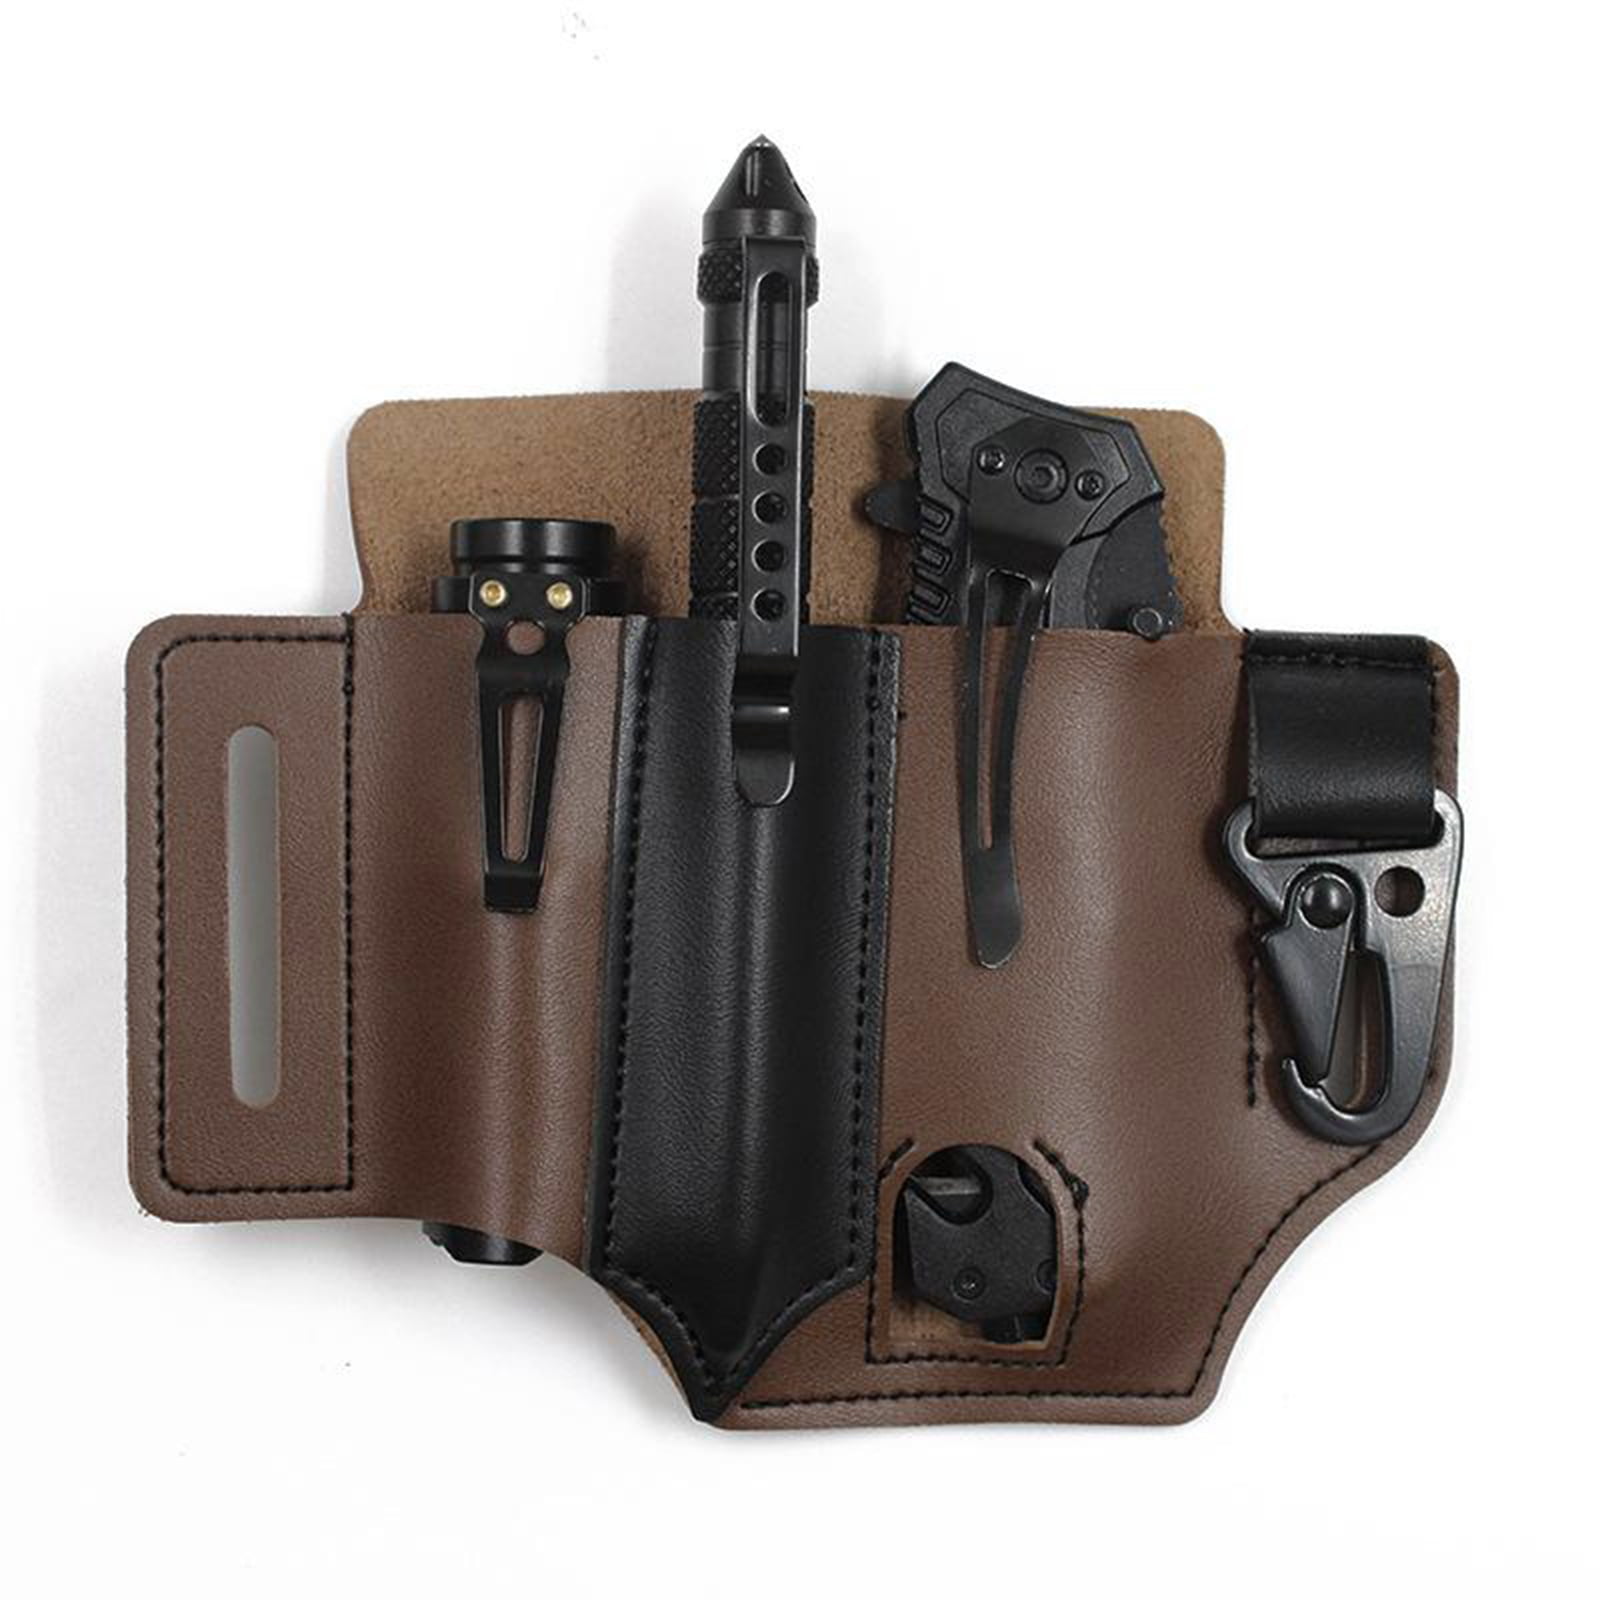 EDC Leather Sheath 3 Pockets Organizer Pouches Holsters for Tool/Knives/Flashlights/Tactical Pens/Most Leatherman MultiTools Brown